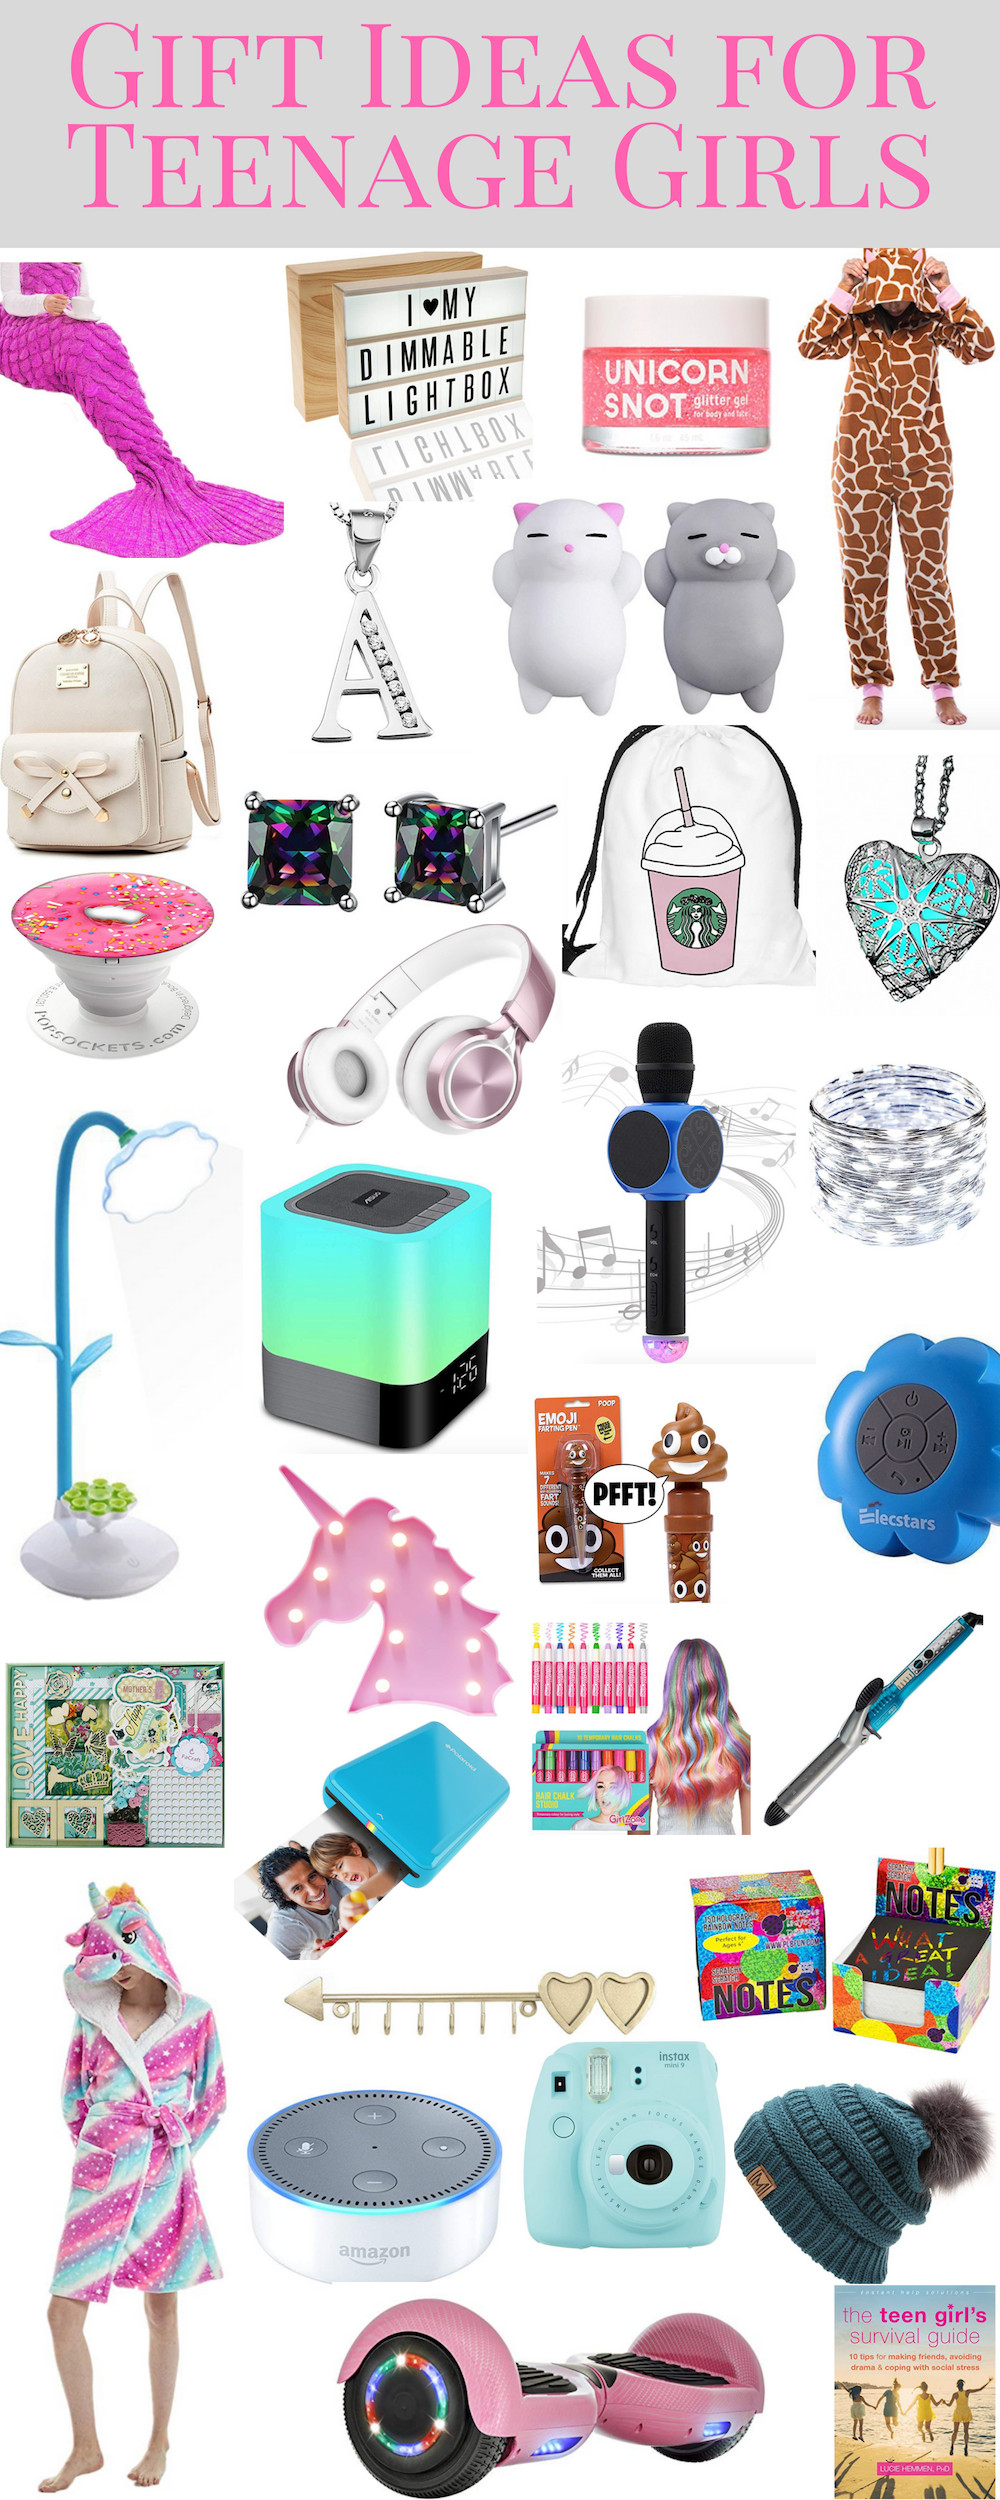 Tween Girls Gift Ideas
 Gift Ideas for Tween and Teen Girls — Our Kind of Crazy